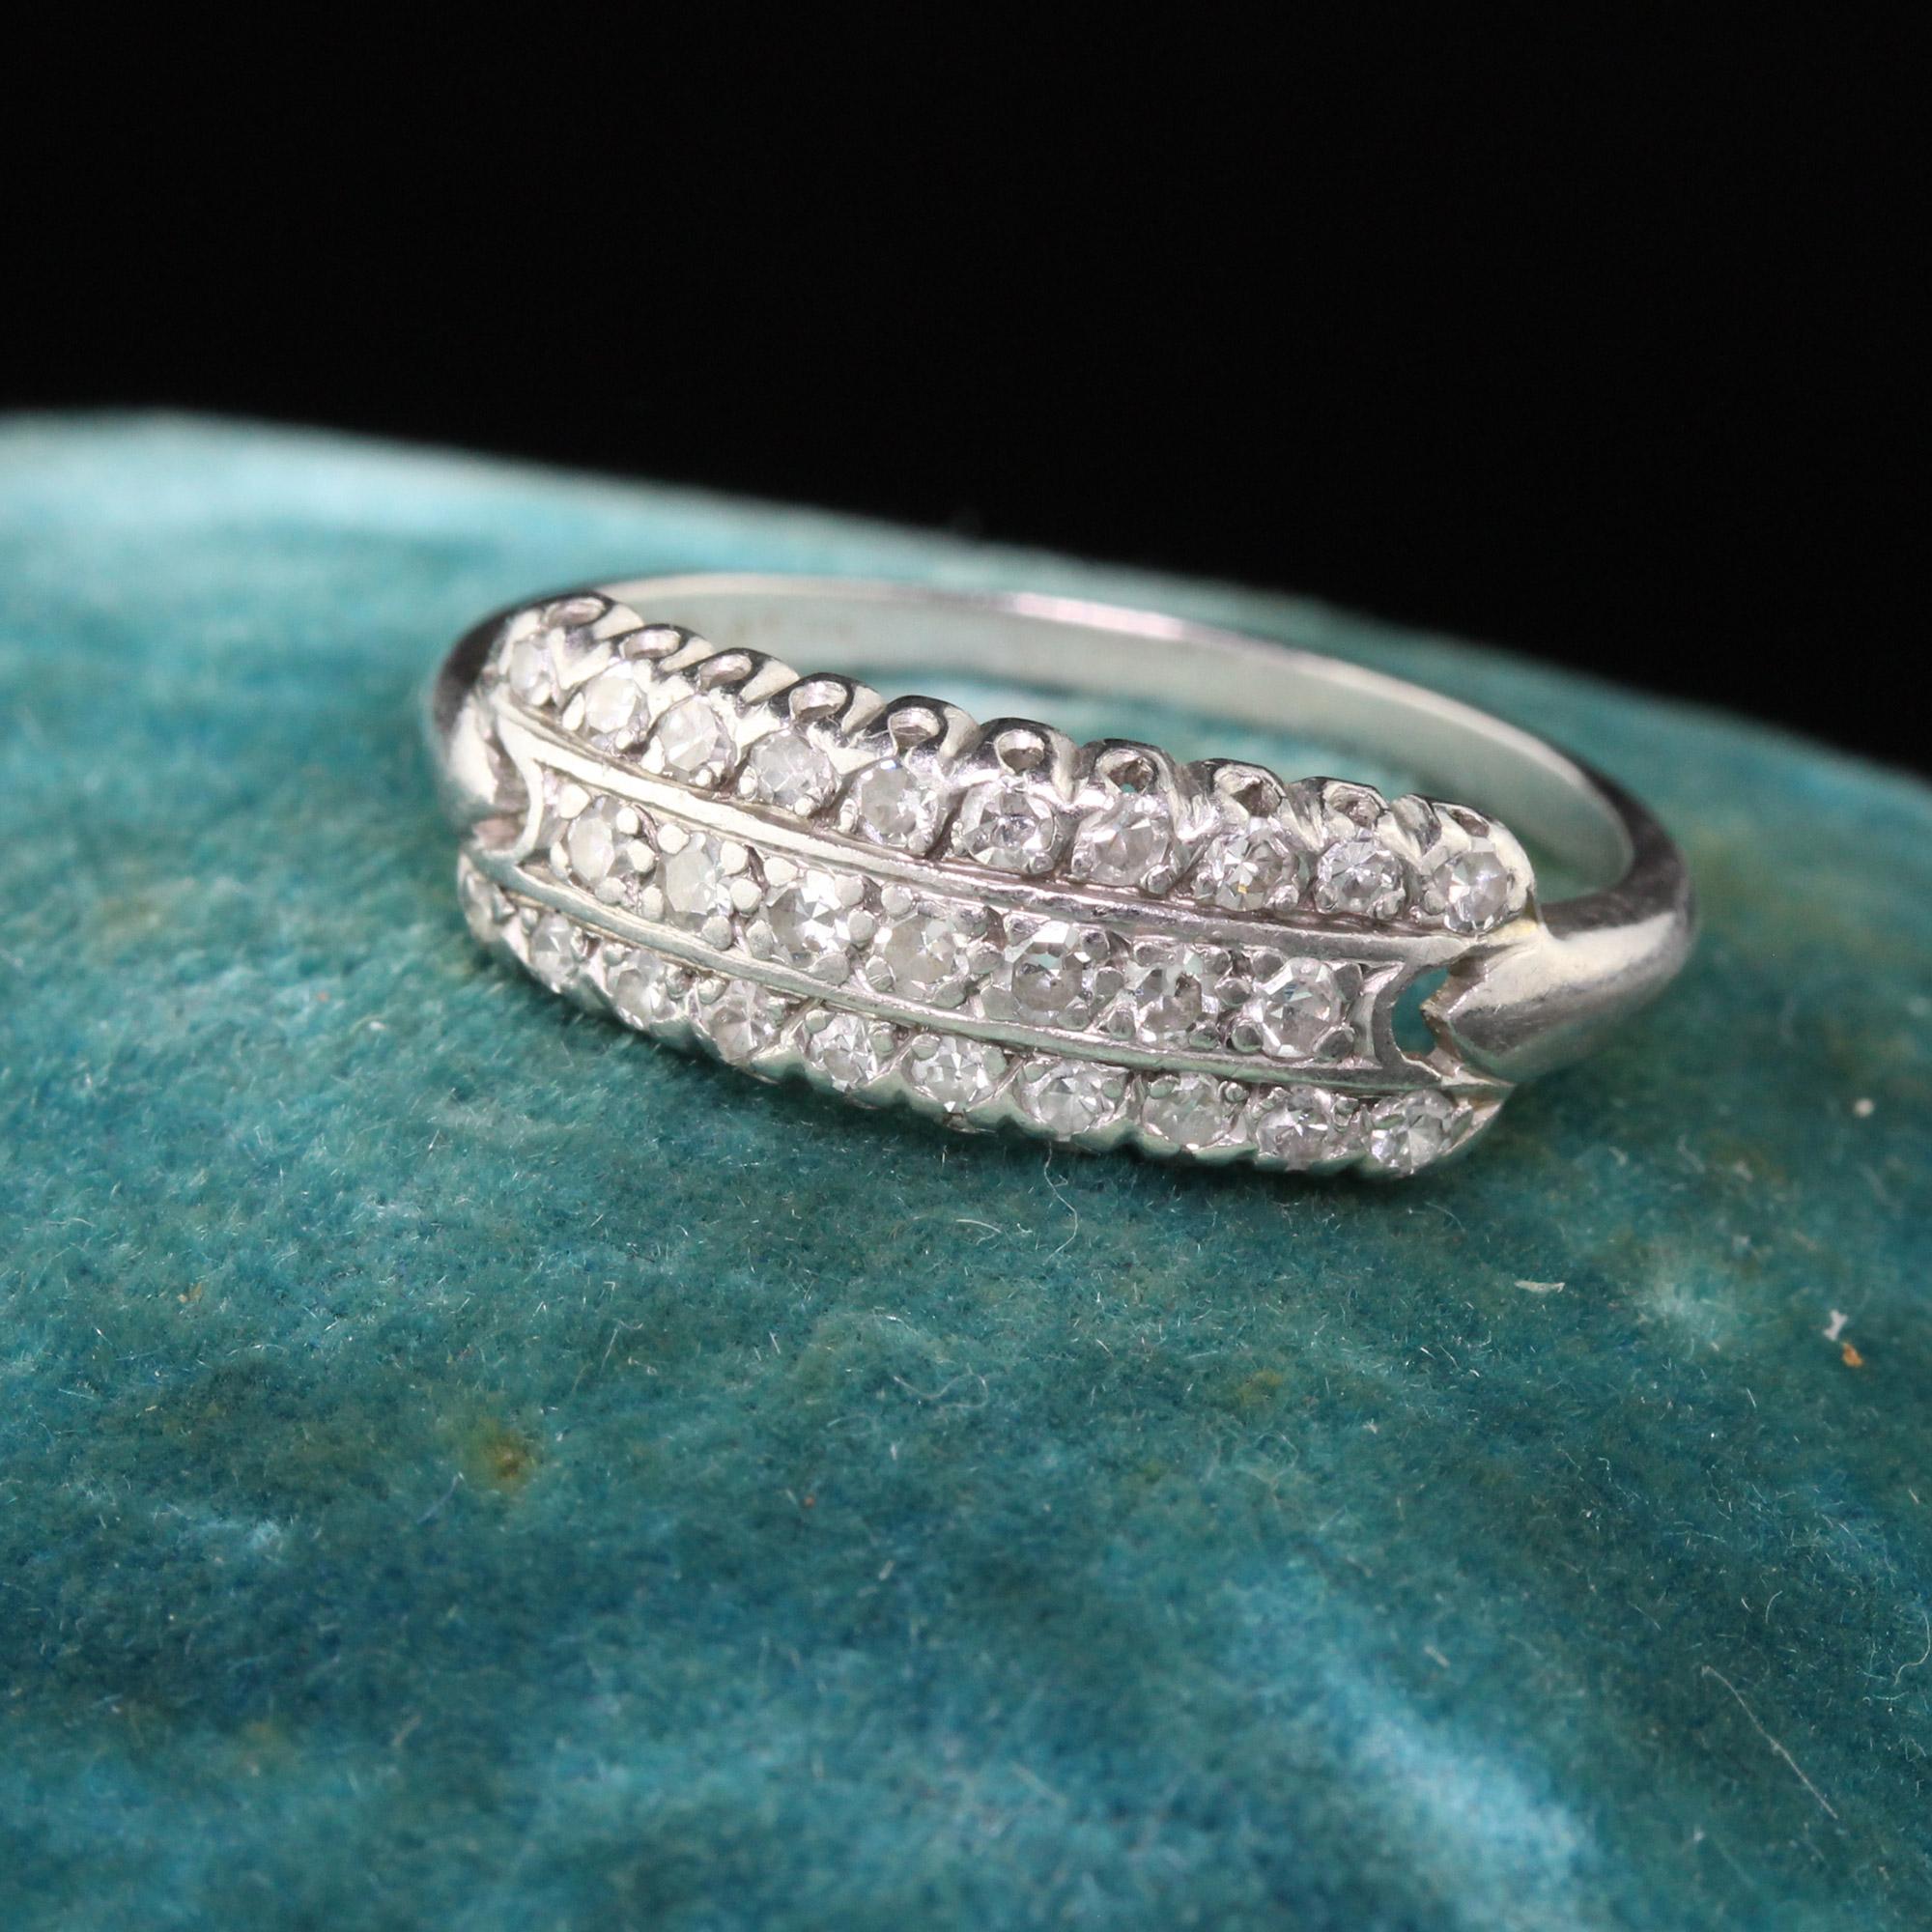 Beautiful Art Deco Platinum wedding band with diamonds.

#R0244

Metal: Platinum

Weight: 2.8 Grams

Total Diamond Weight: Approximately 0.27 CTS 

Ring Size: 6 1/2

This ring can be sized for a $50 fee!

*Please note that we cannot accept returns